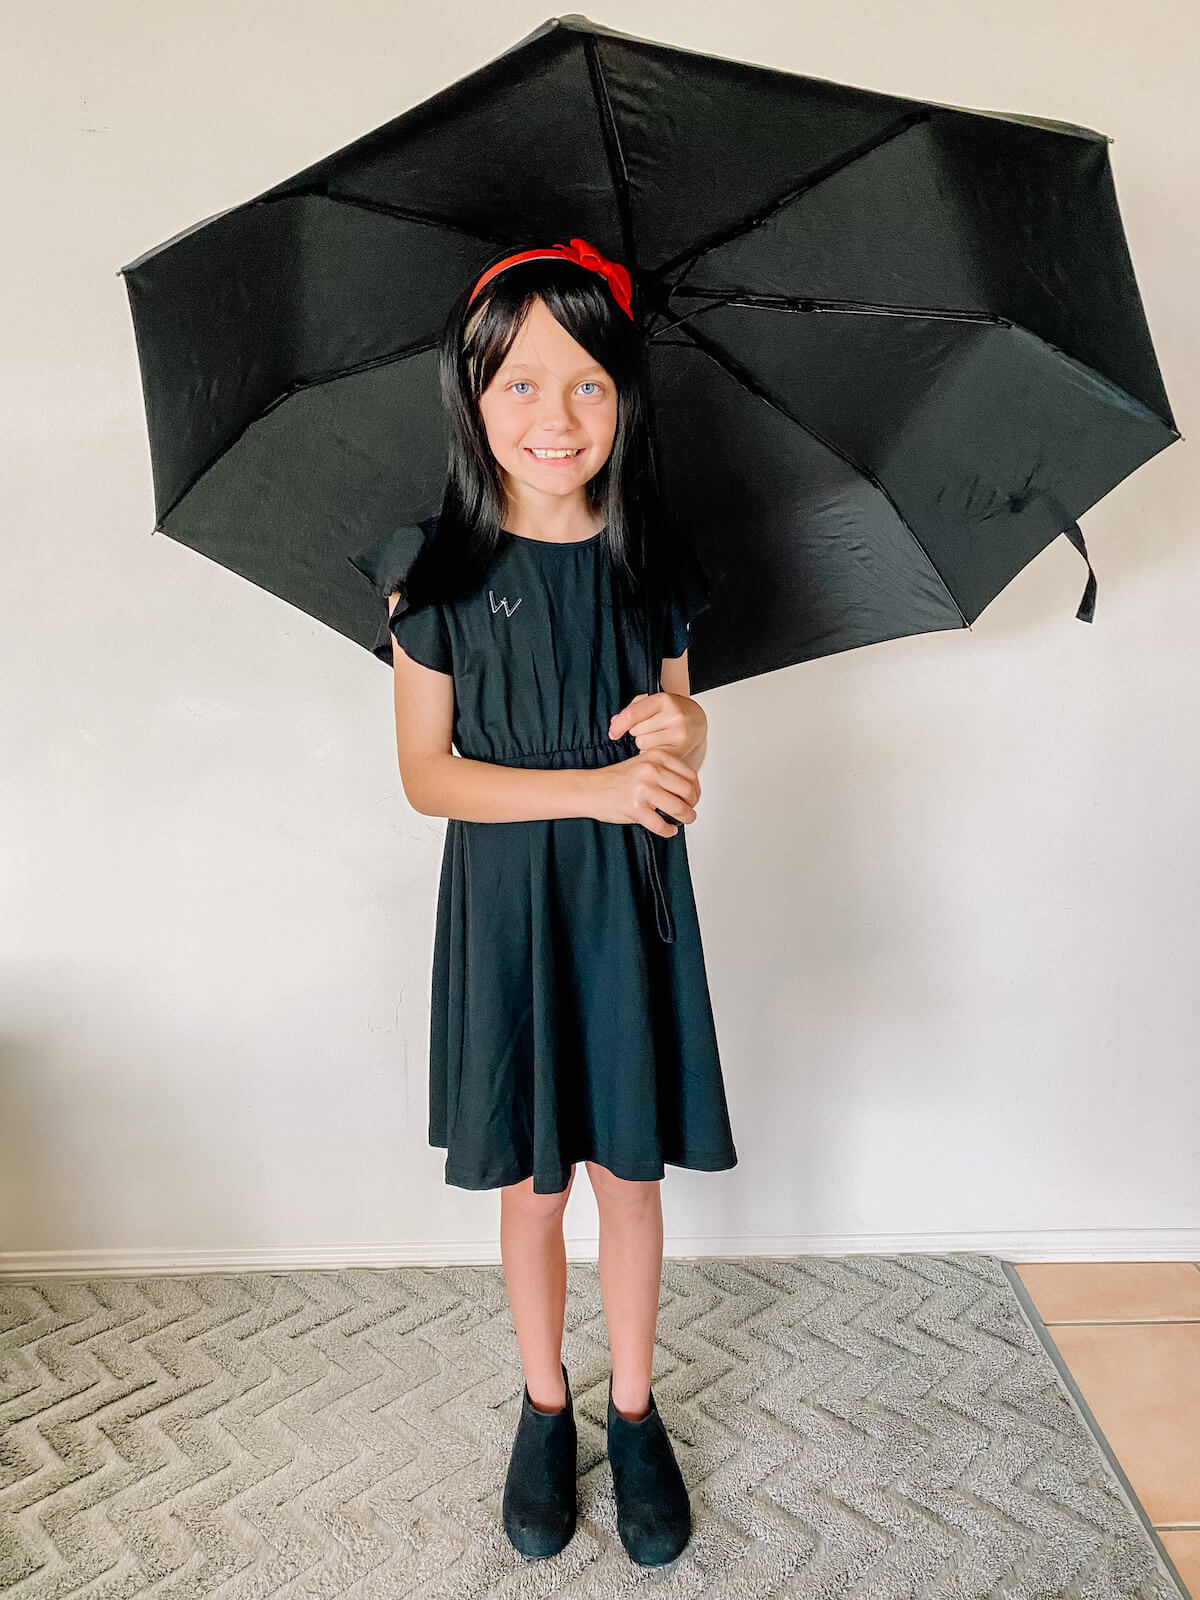 Child with open umbrella dressed as morrigan crow from nevermoor